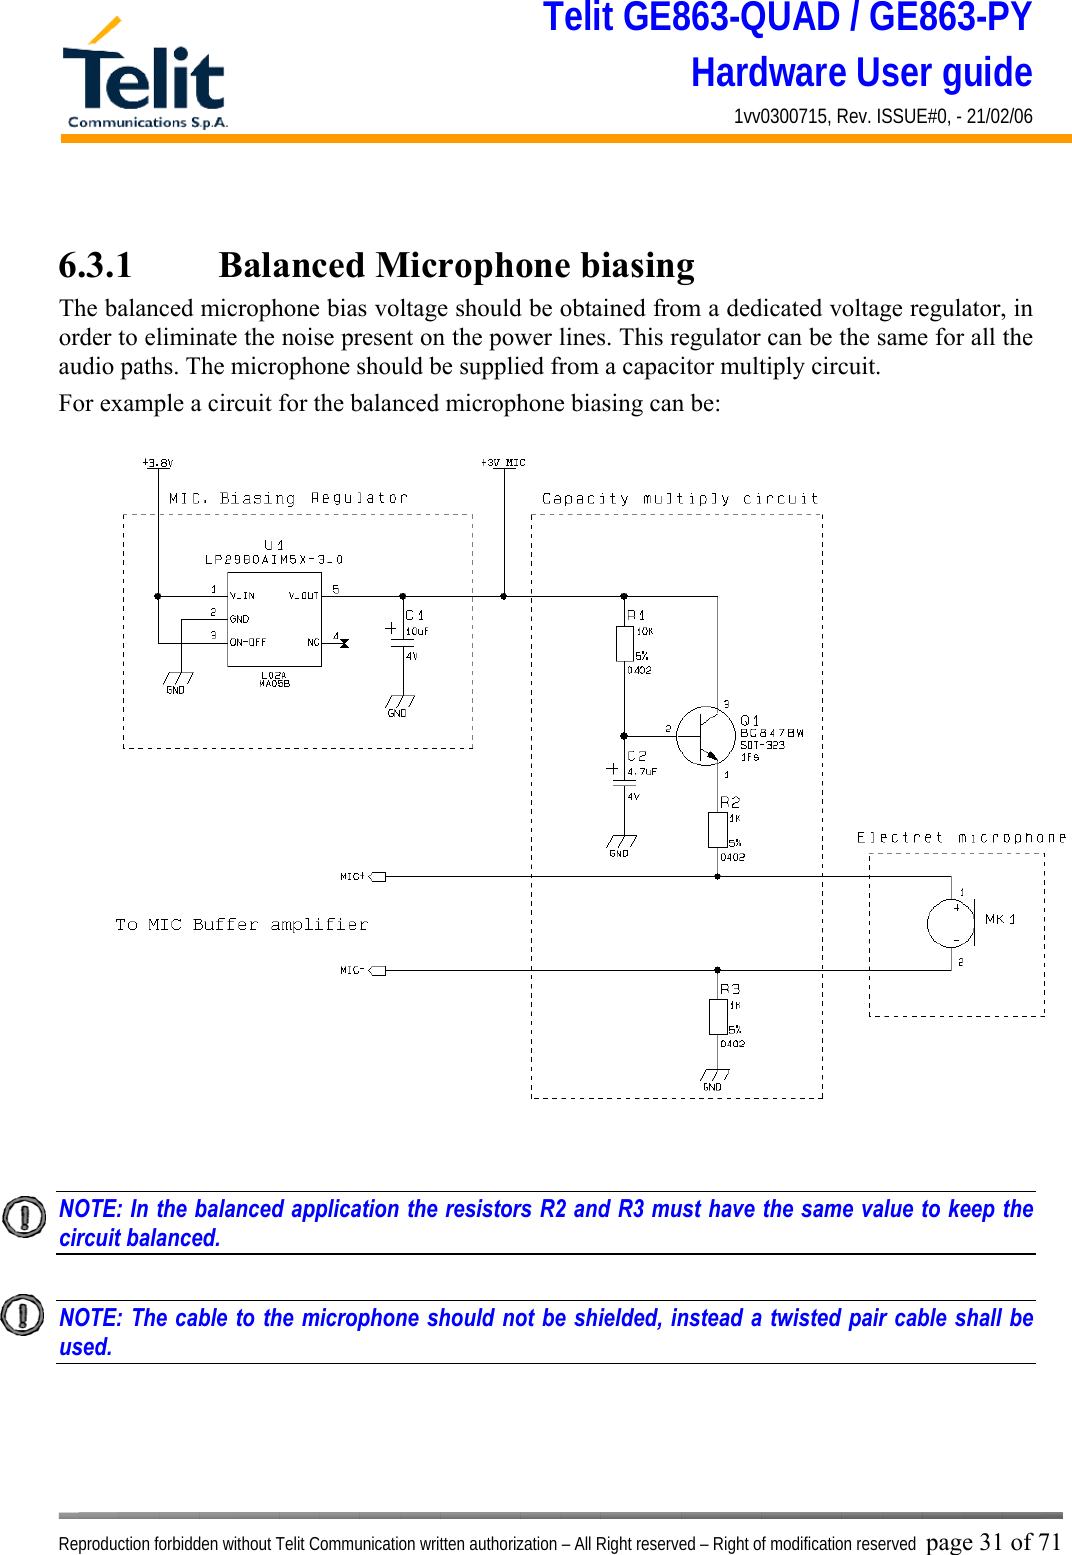 Telit GE863-QUAD / GE863-PY Hardware User guide 1vv0300715, Rev. ISSUE#0, - 21/02/06    Reproduction forbidden without Telit Communication written authorization – All Right reserved – Right of modification reserved page 31 of 71  6.3.1    Balanced Microphone biasing The balanced microphone bias voltage should be obtained from a dedicated voltage regulator, in order to eliminate the noise present on the power lines. This regulator can be the same for all the audio paths. The microphone should be supplied from a capacitor multiply circuit. For example a circuit for the balanced microphone biasing can be:   NOTE: In the balanced application the resistors R2 and R3 must have the same value to keep the circuit balanced.    NOTE: The cable to the microphone should not be shielded, instead a twisted pair cable shall be used.    